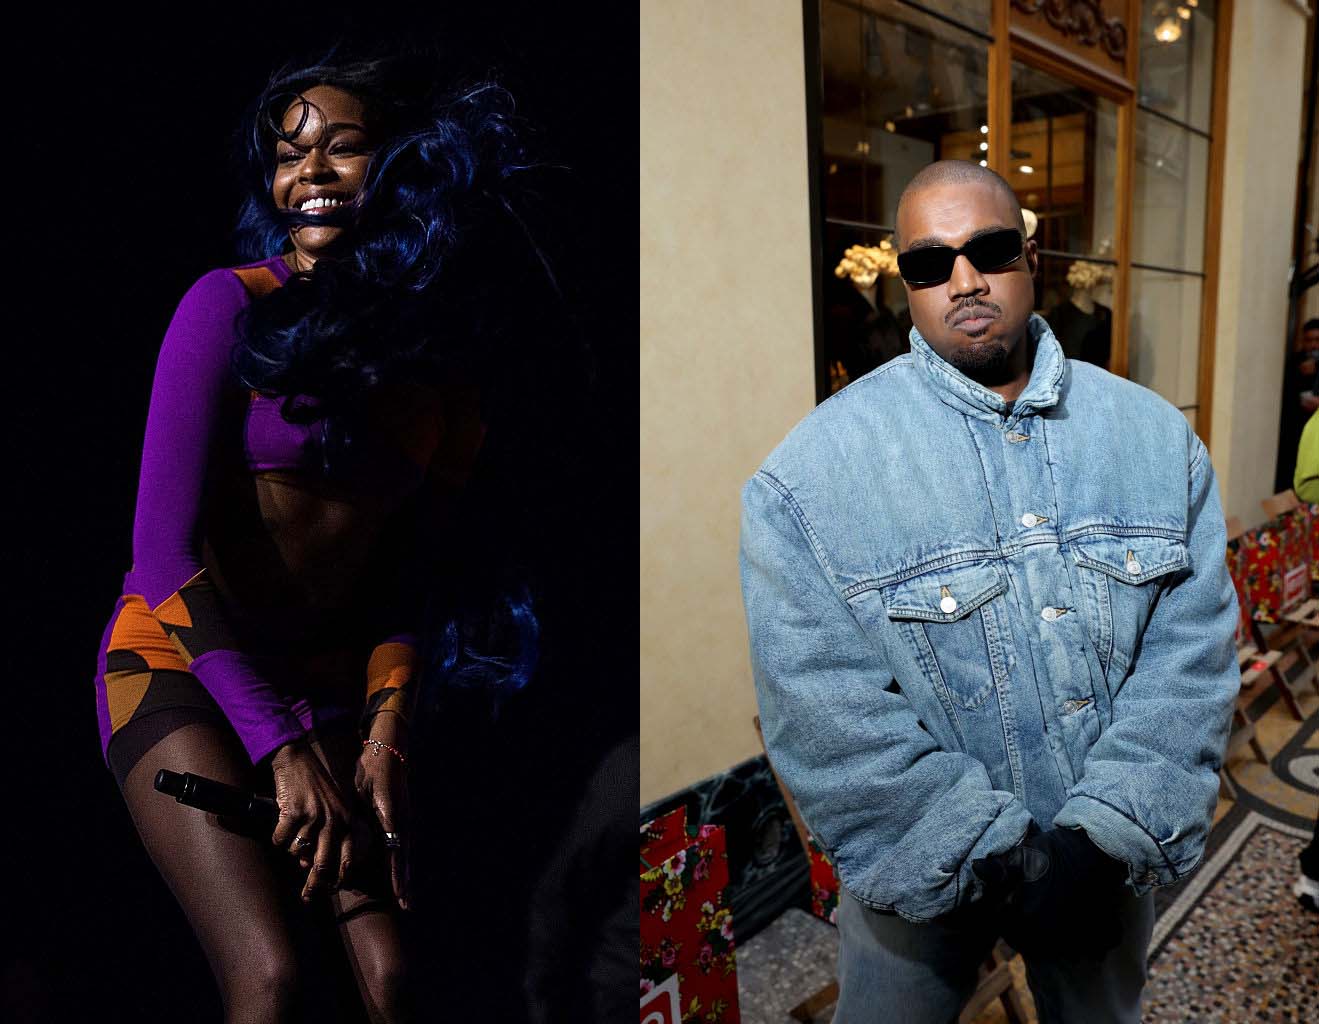 Azealia Banks Raised Strong Points on Kanye West's Current Feud With Ex-Wife Kim Kardashian